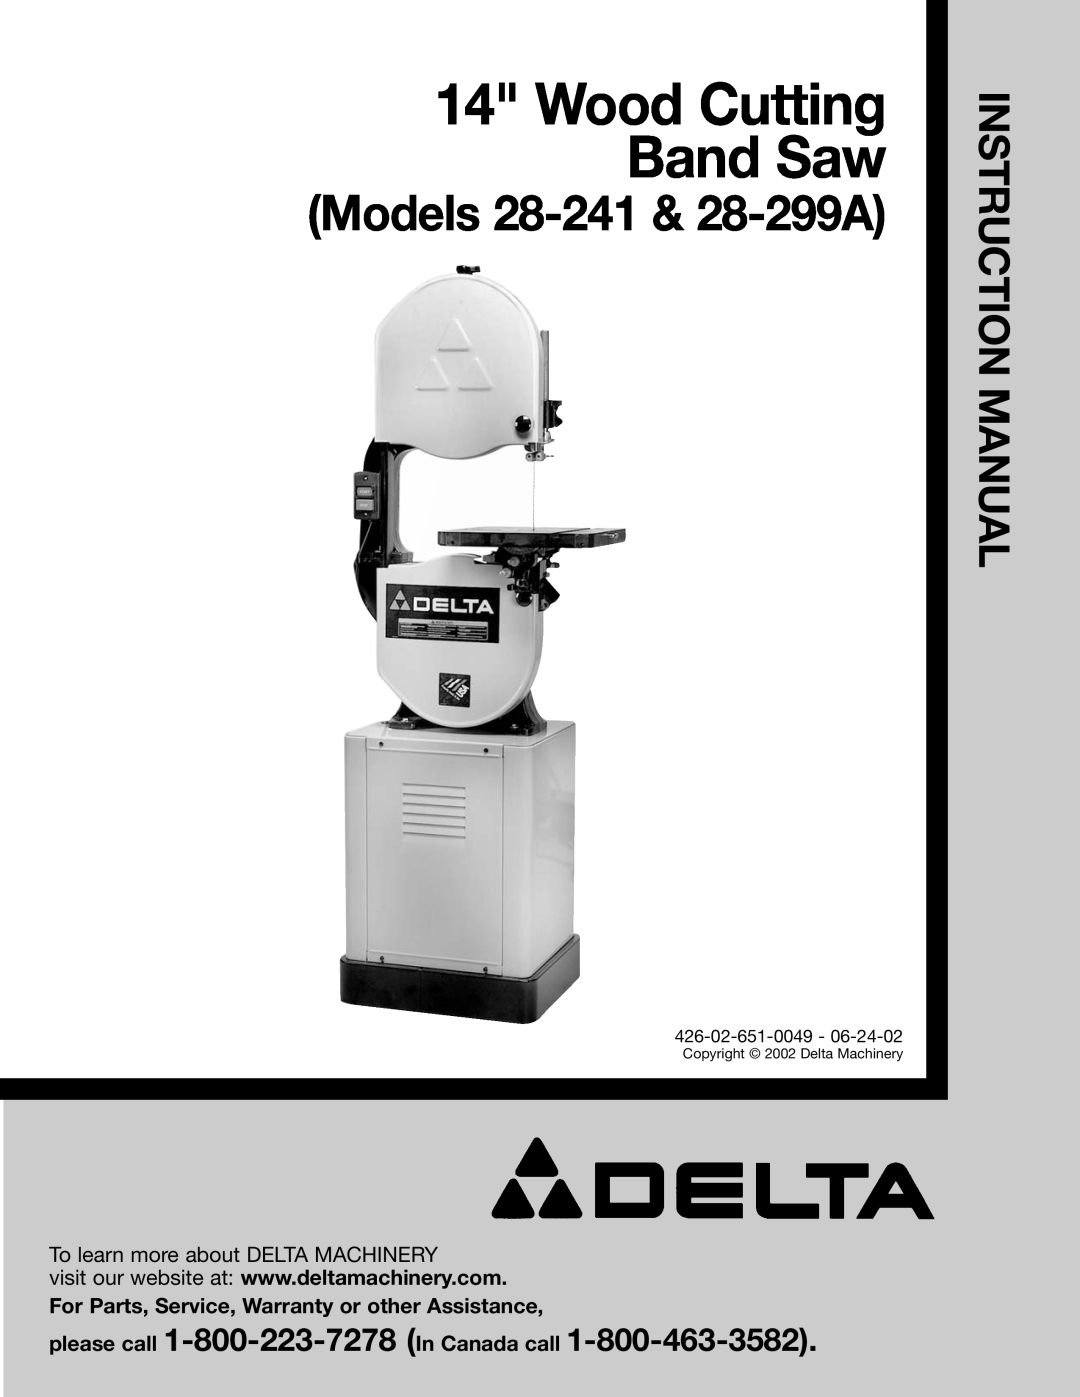 Delta 28-241 instruction manual Instruction Manual, please call 1-800-223-7278 In Canada call, Wood Cutting Band Saw 